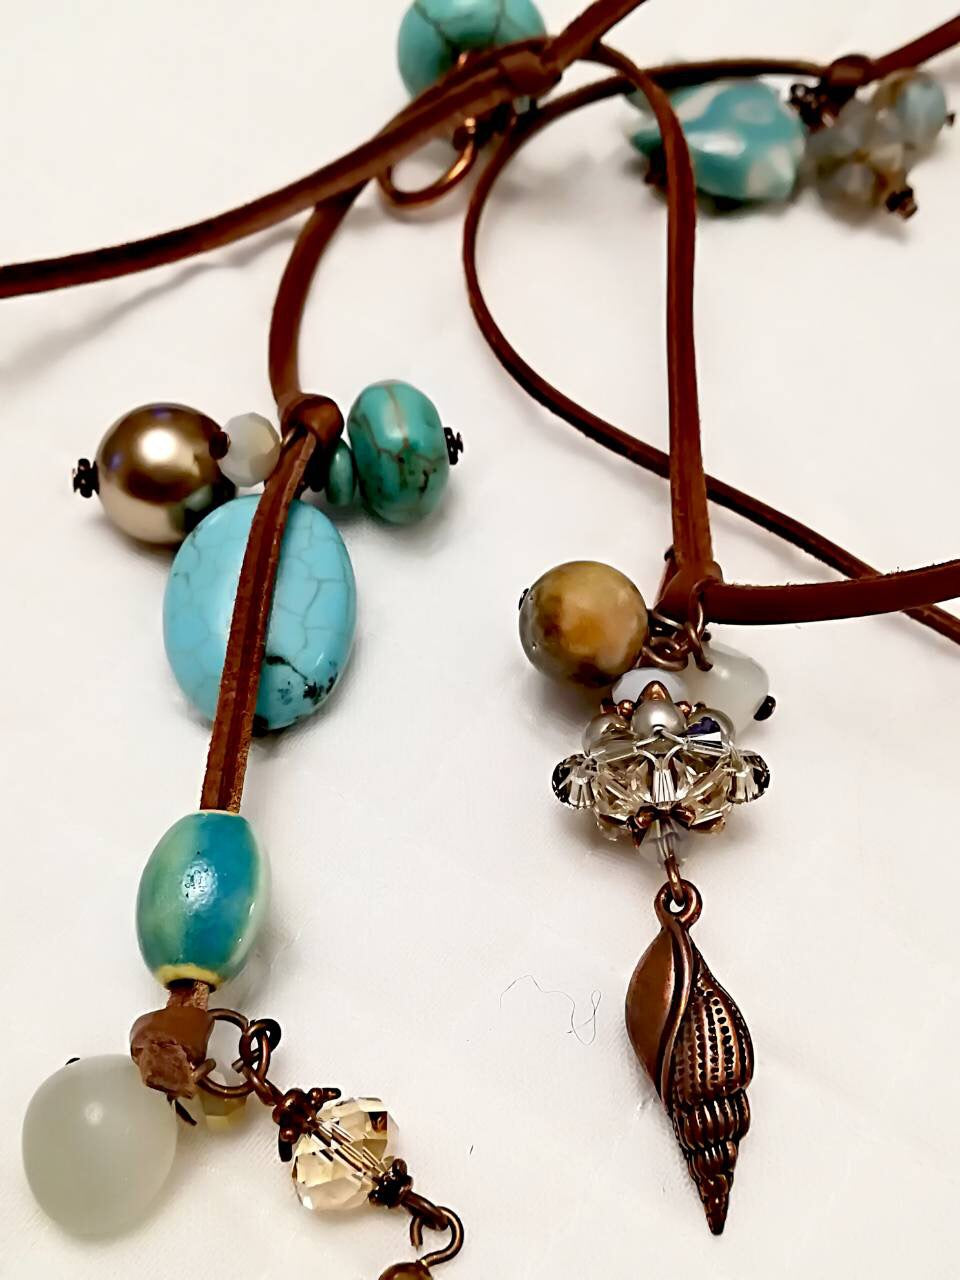 Hande made Necklaces with Turquoise and ceramic Swarovski crystals